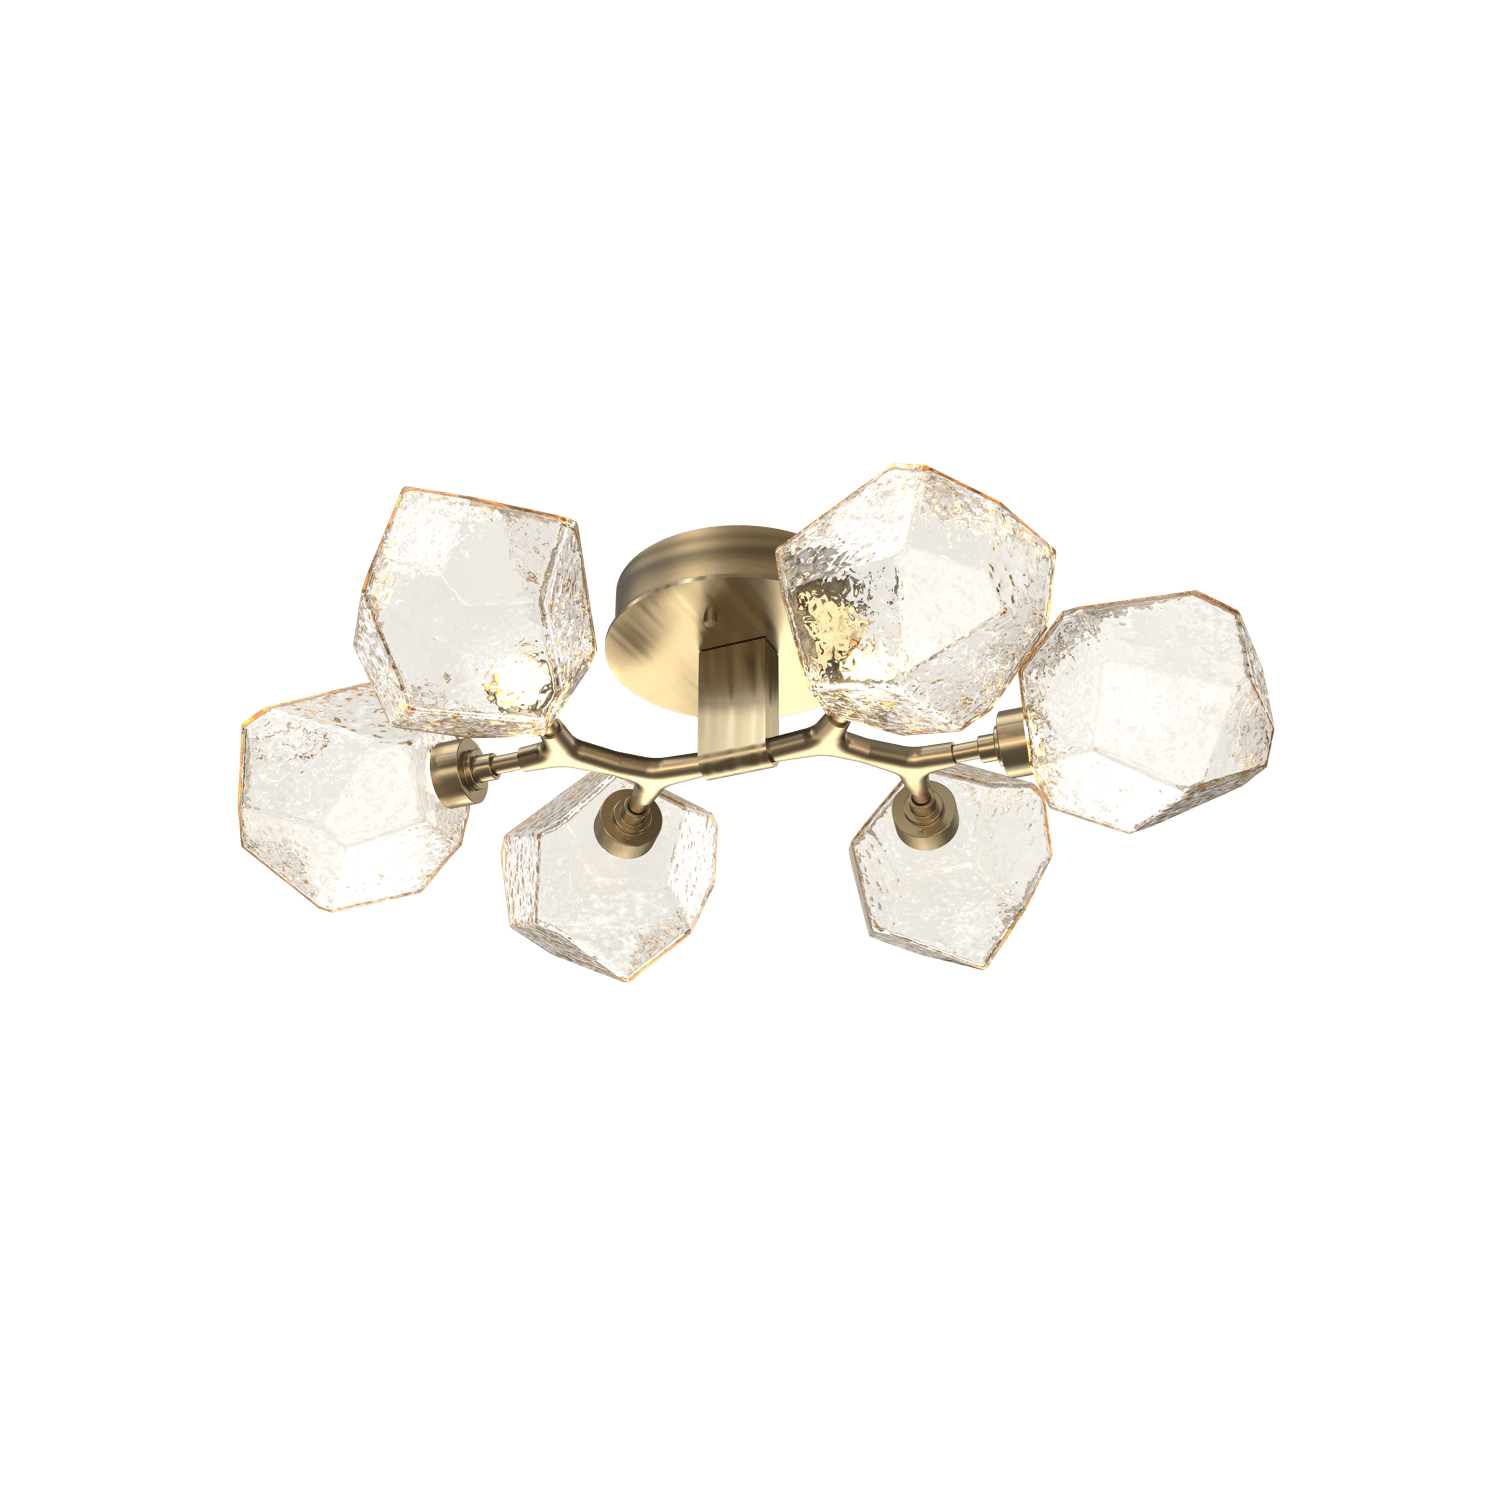 CLB0039-01-HB-A-Hammerton-Studio-Gem-6-light-organic-flush-mount-light-with-heritage-brass-finish-and-amber-blown-glass-shades-and-LED-lamping